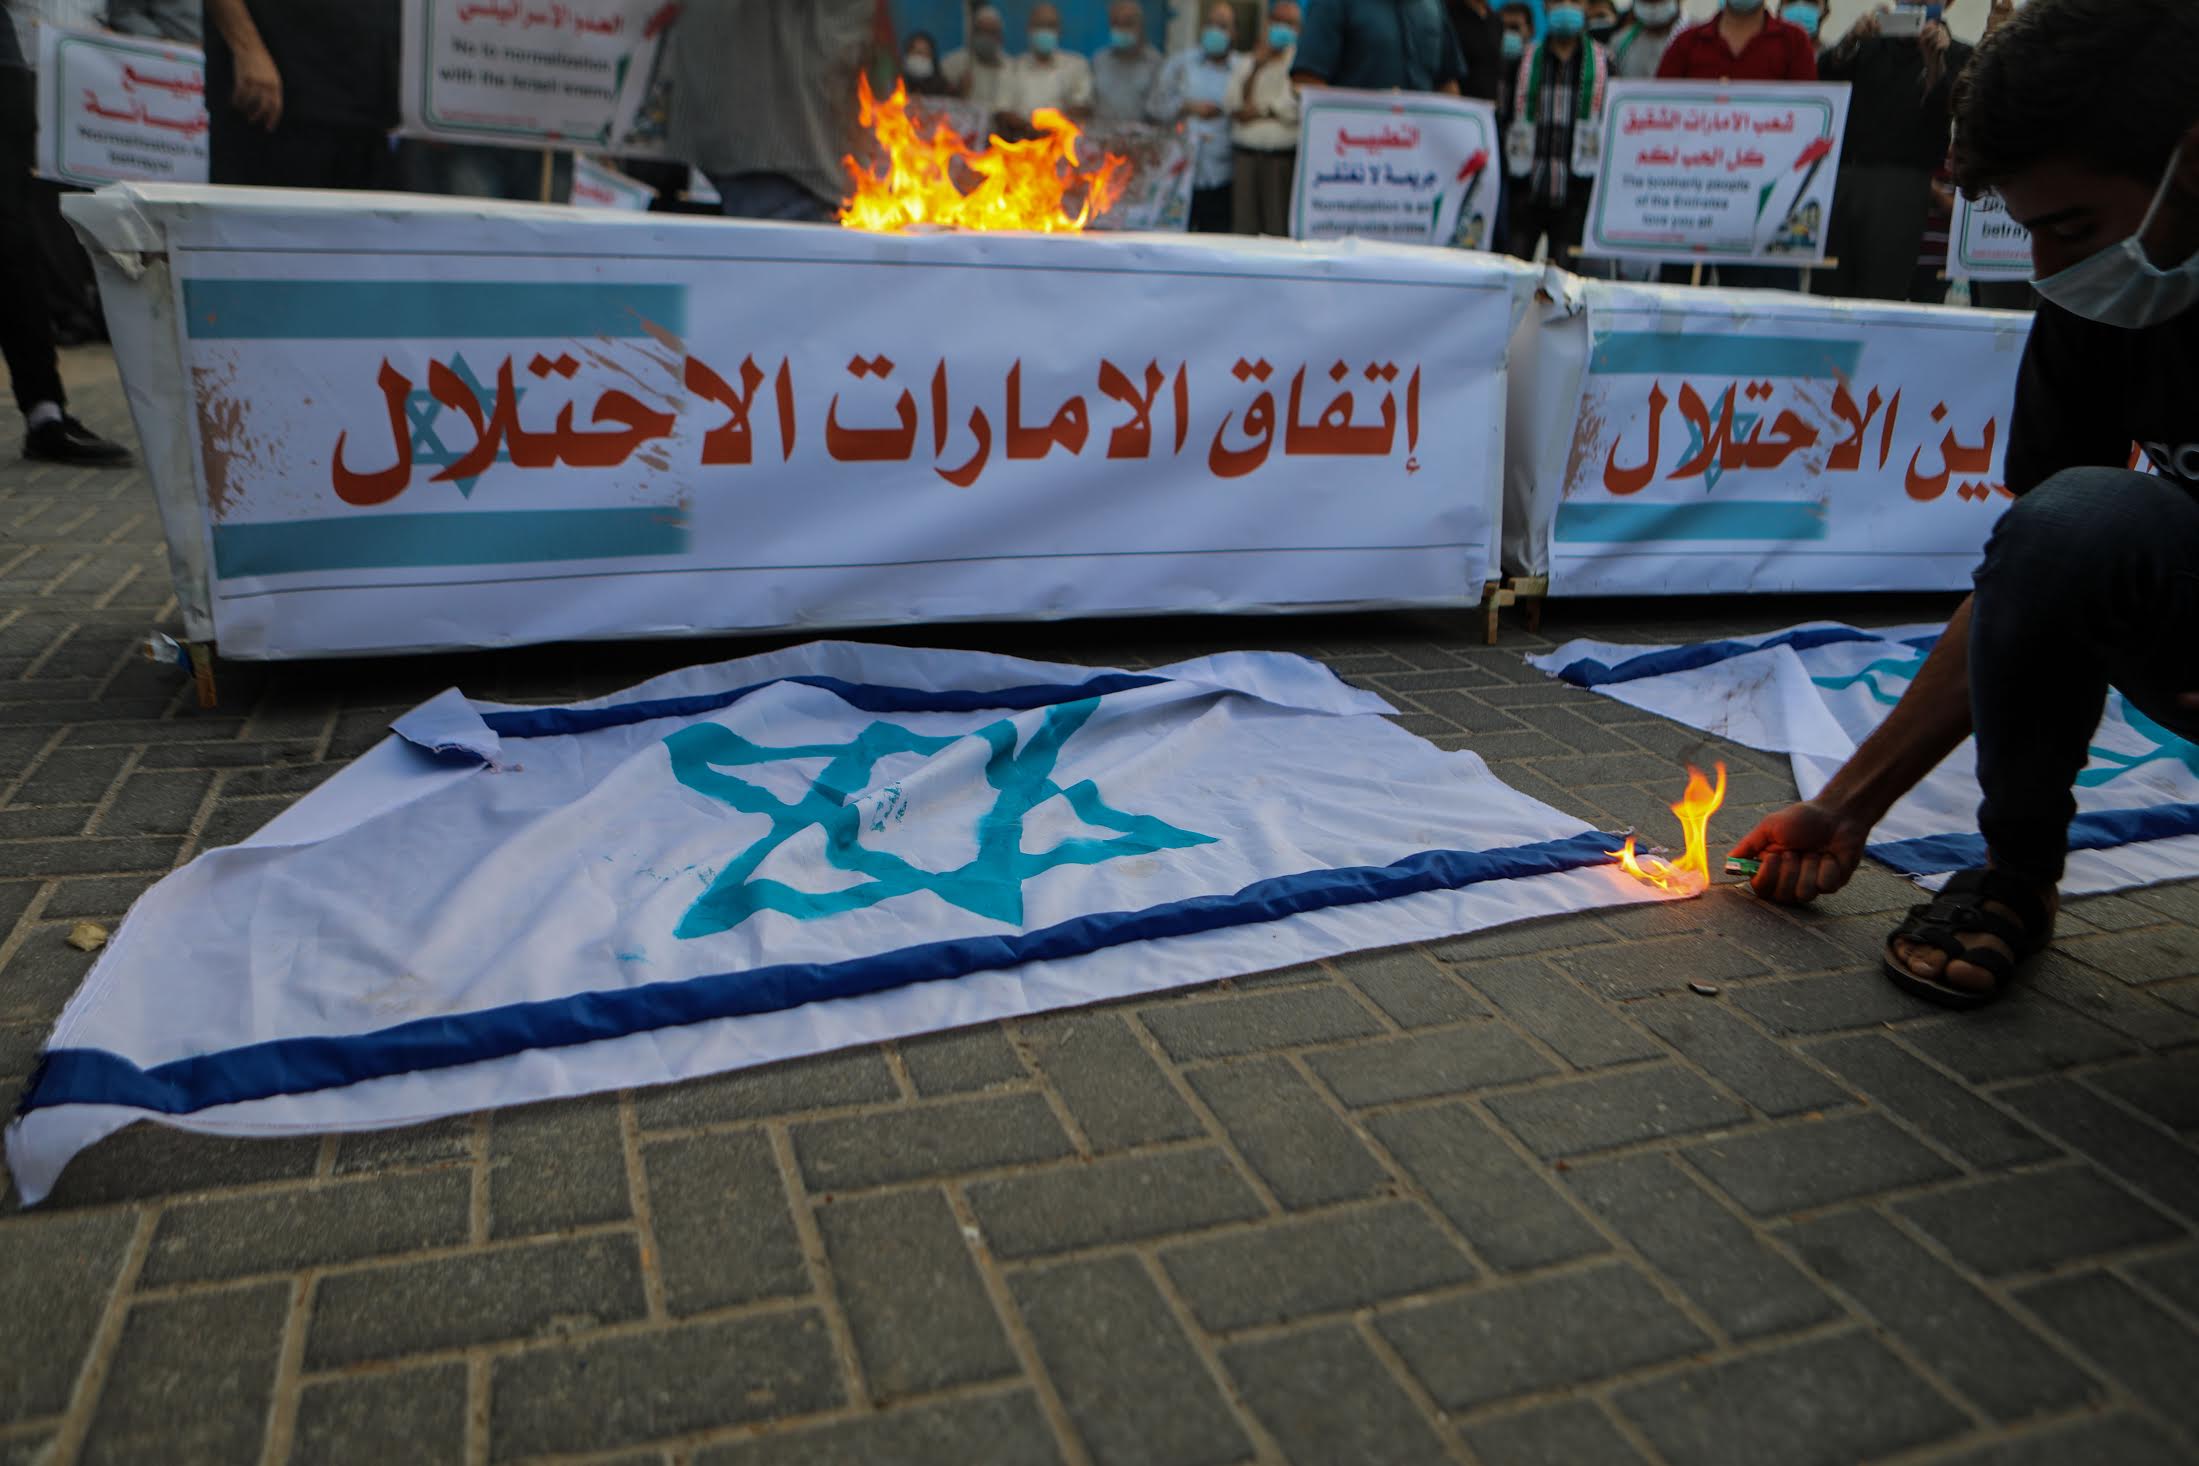 Banners labeled "Emirates' deal with the occupation" and "Bahrain's deal with the occupation" were set on fire during a Gaza protest (MEE/Muhammed Alhajjar)